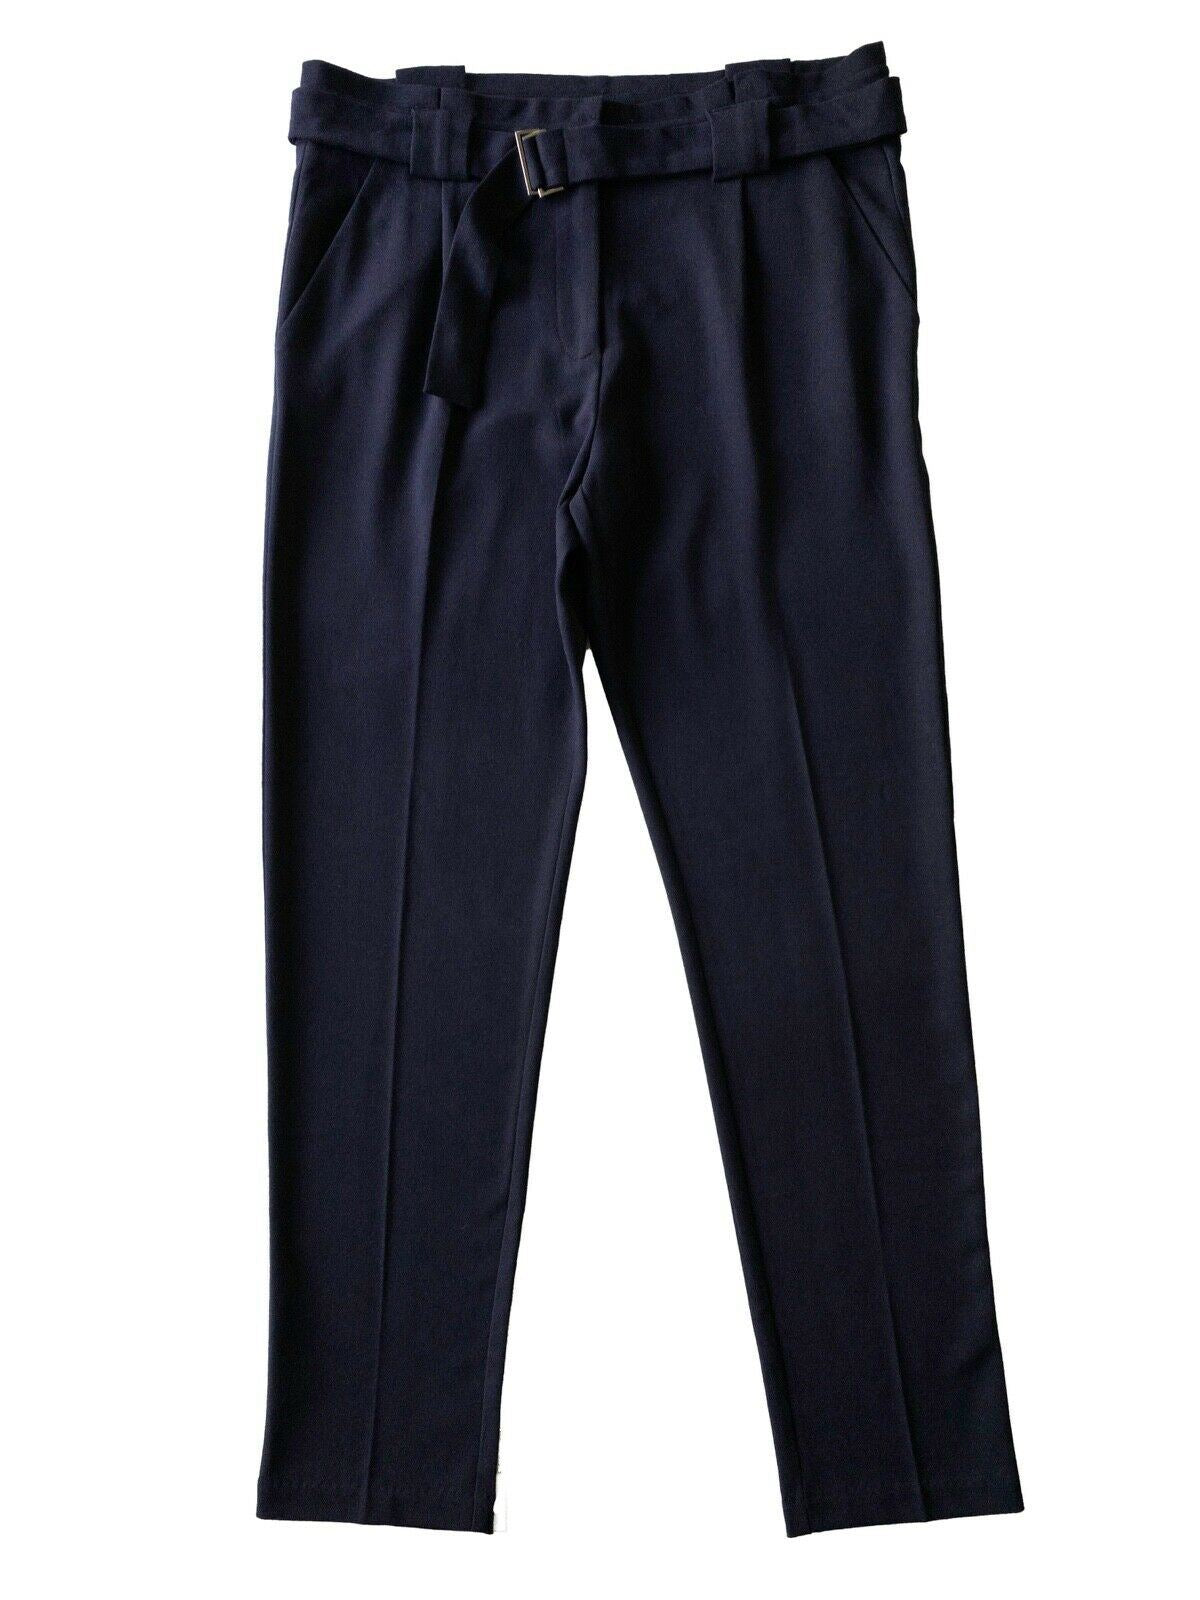 Grace & Mila Navy Paperbag Trousers Size 8, 10, 12